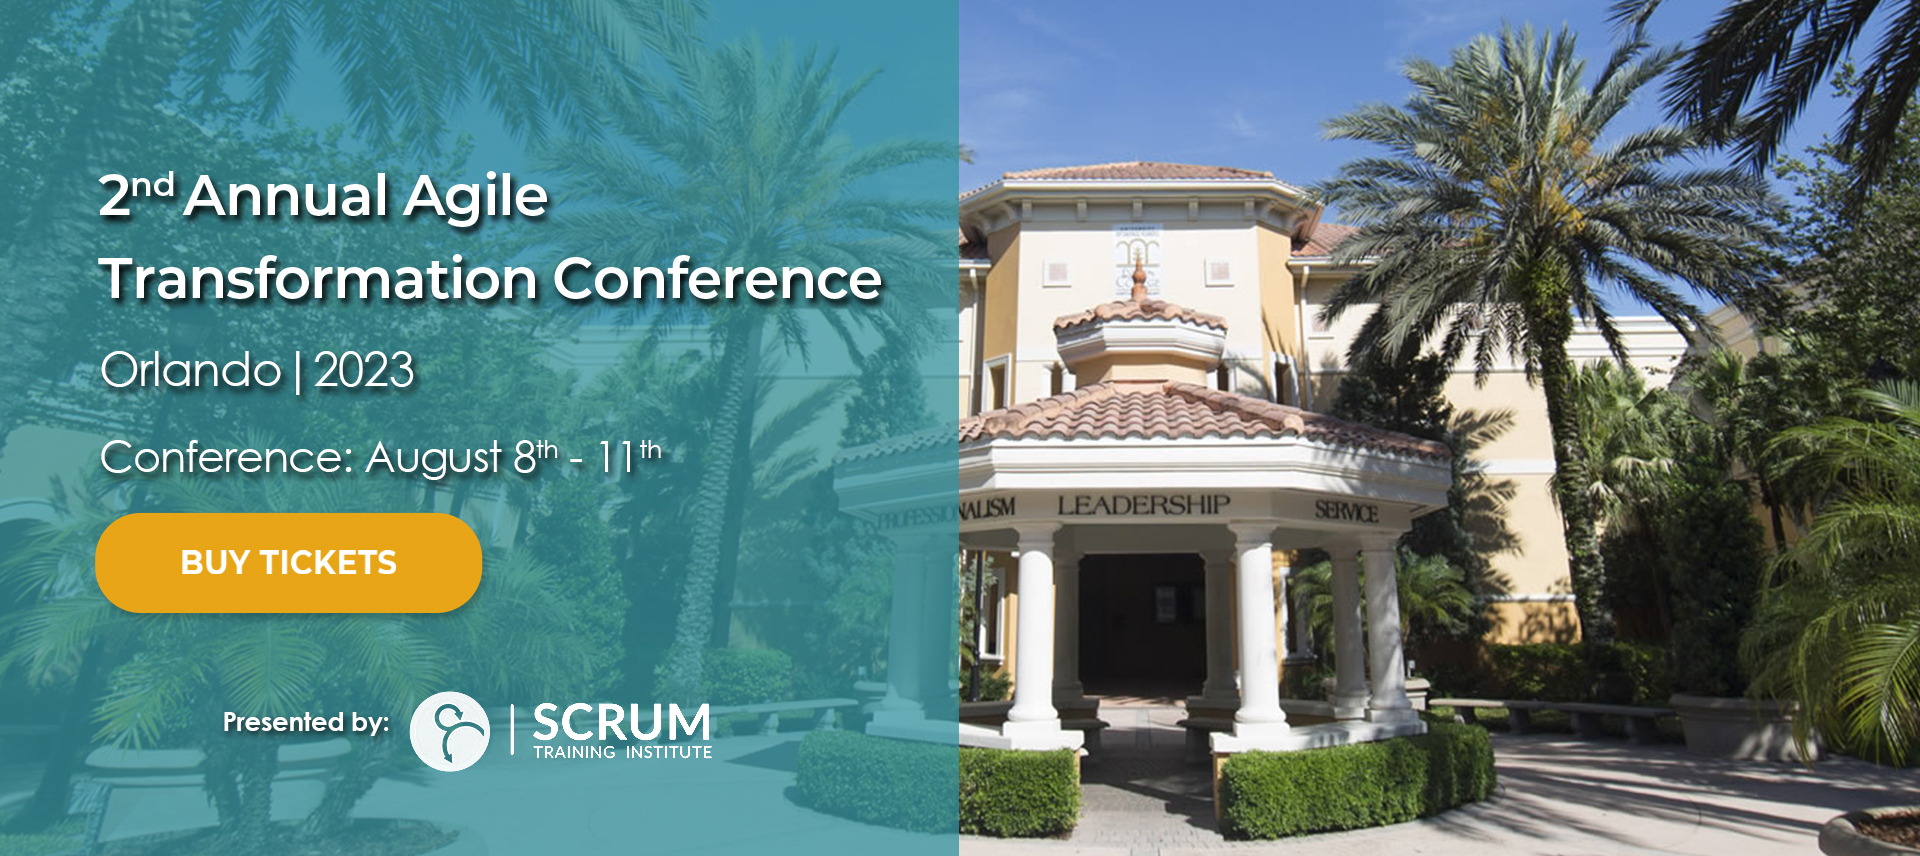 2nd Annual Agile Transformation Conference Orlando 2023Conference: August 8th - 11th